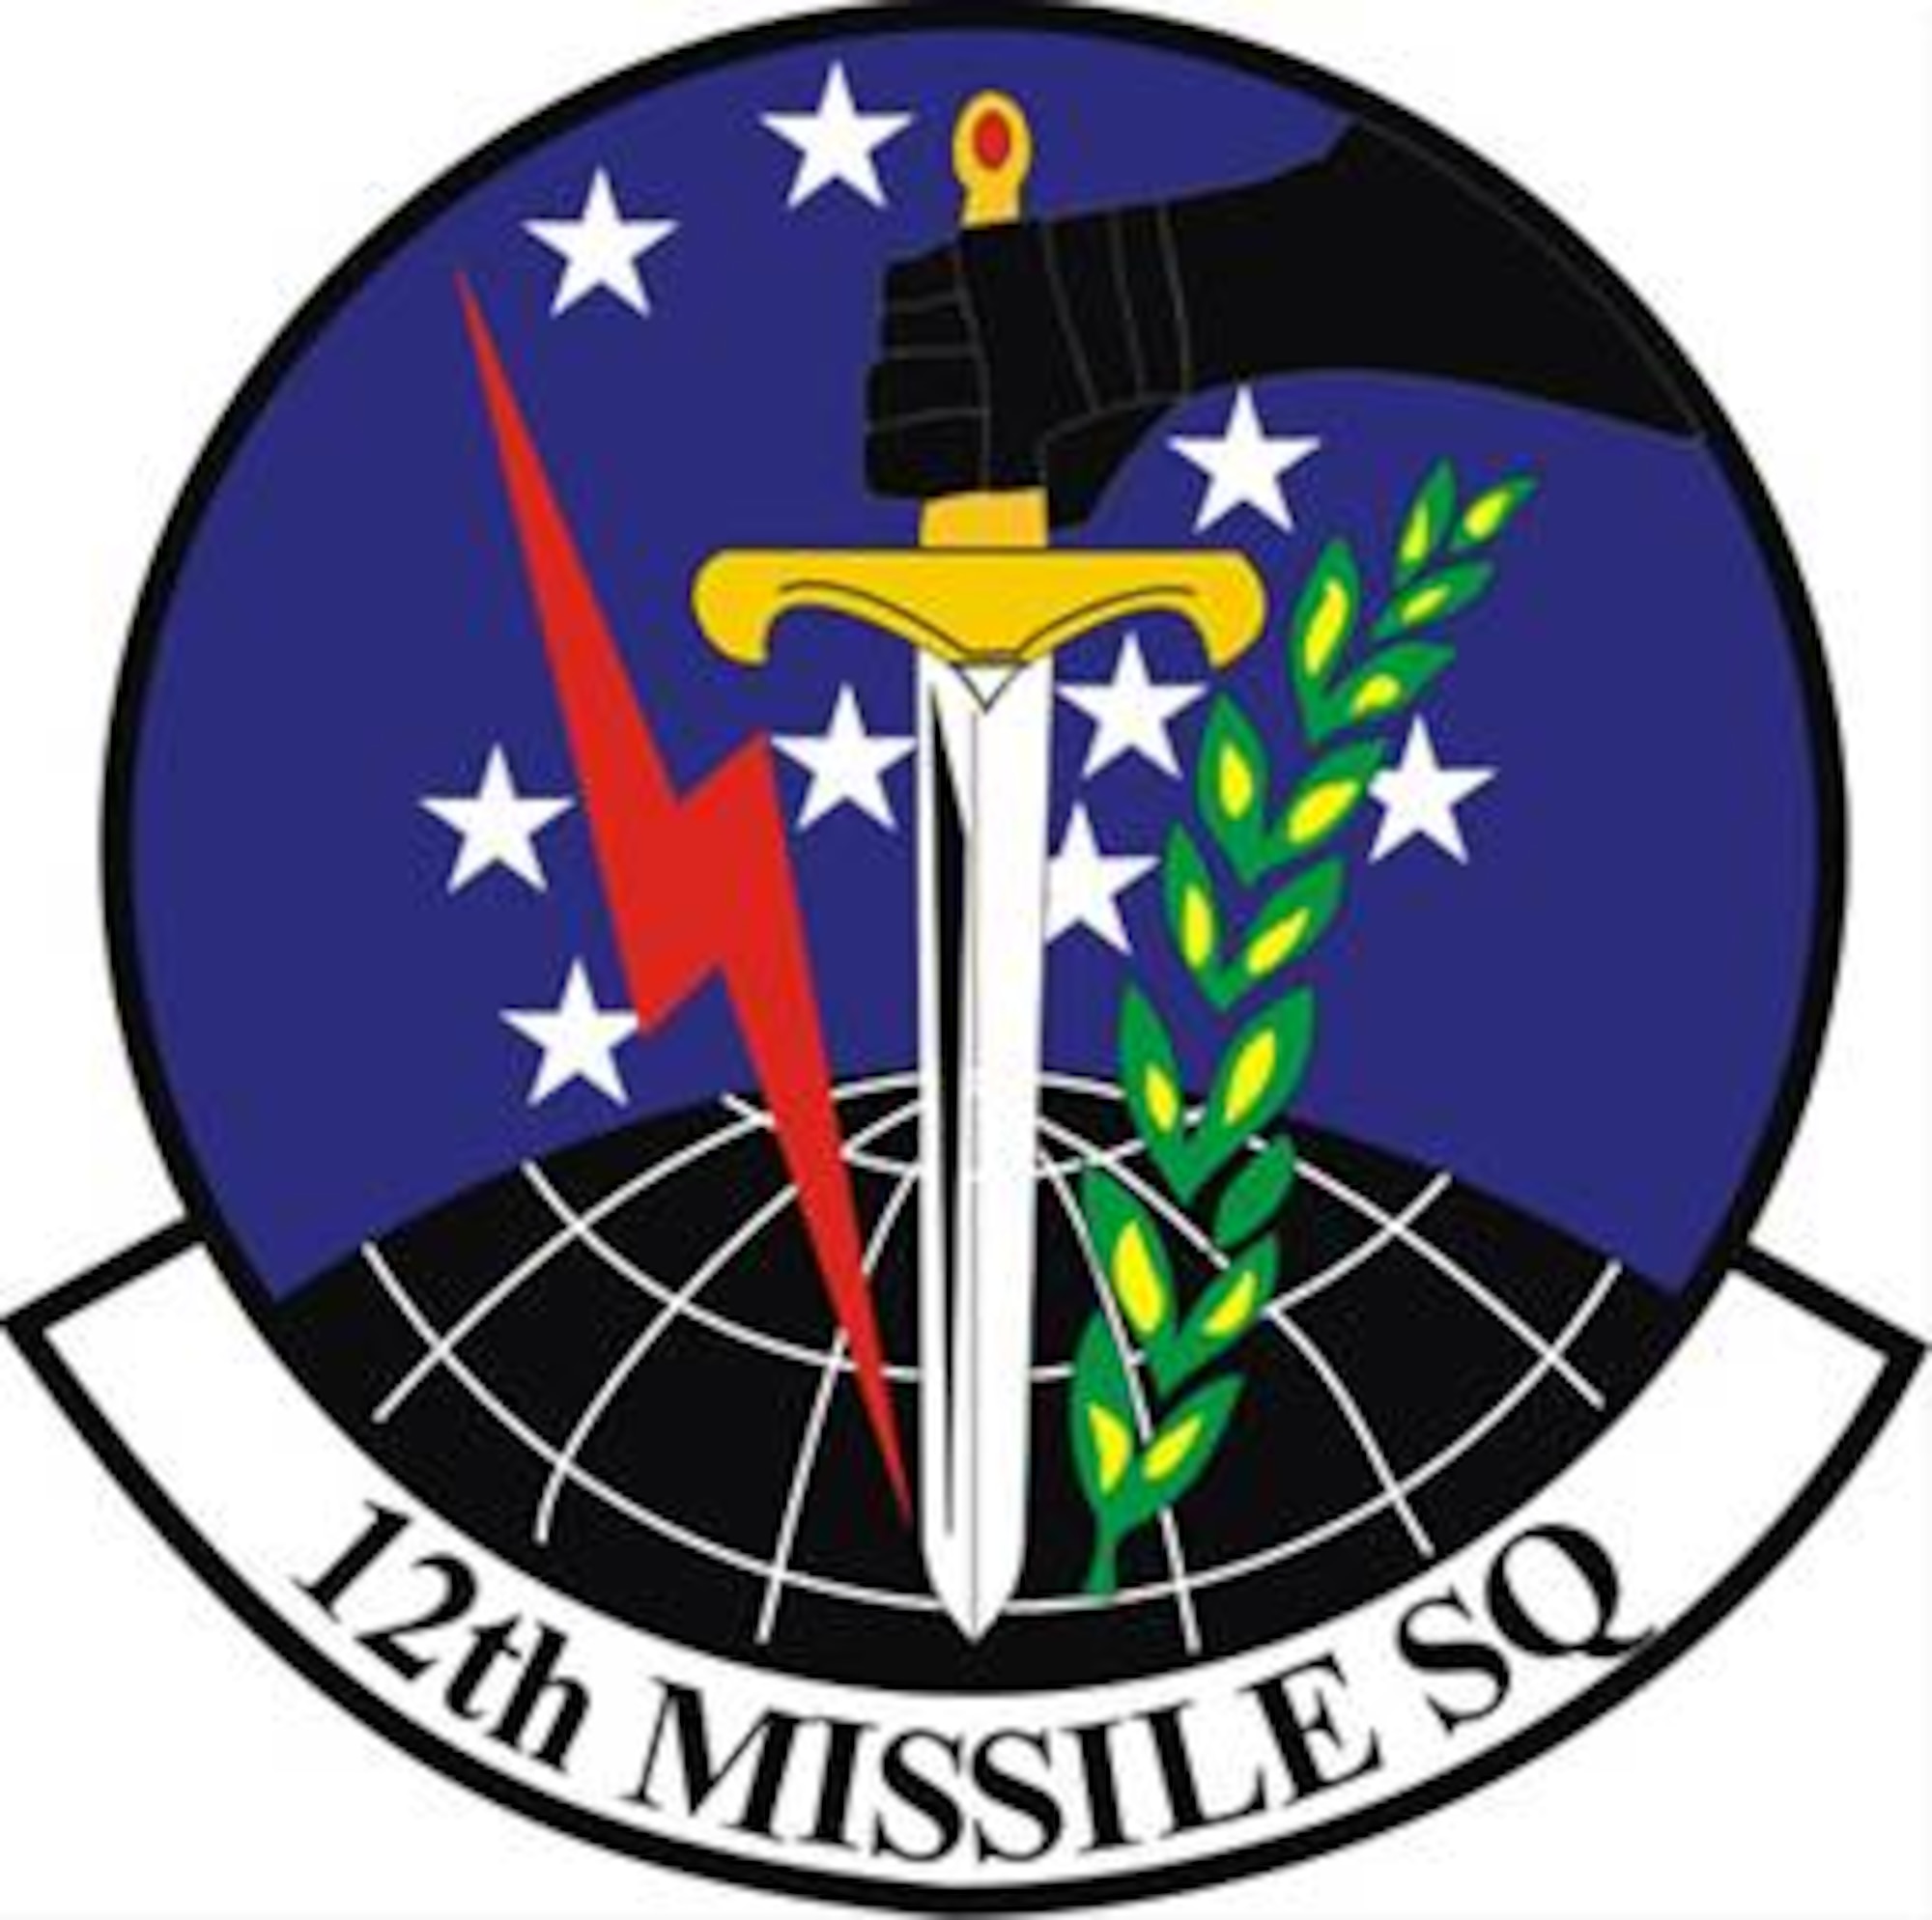 12th Missile Squadron patch